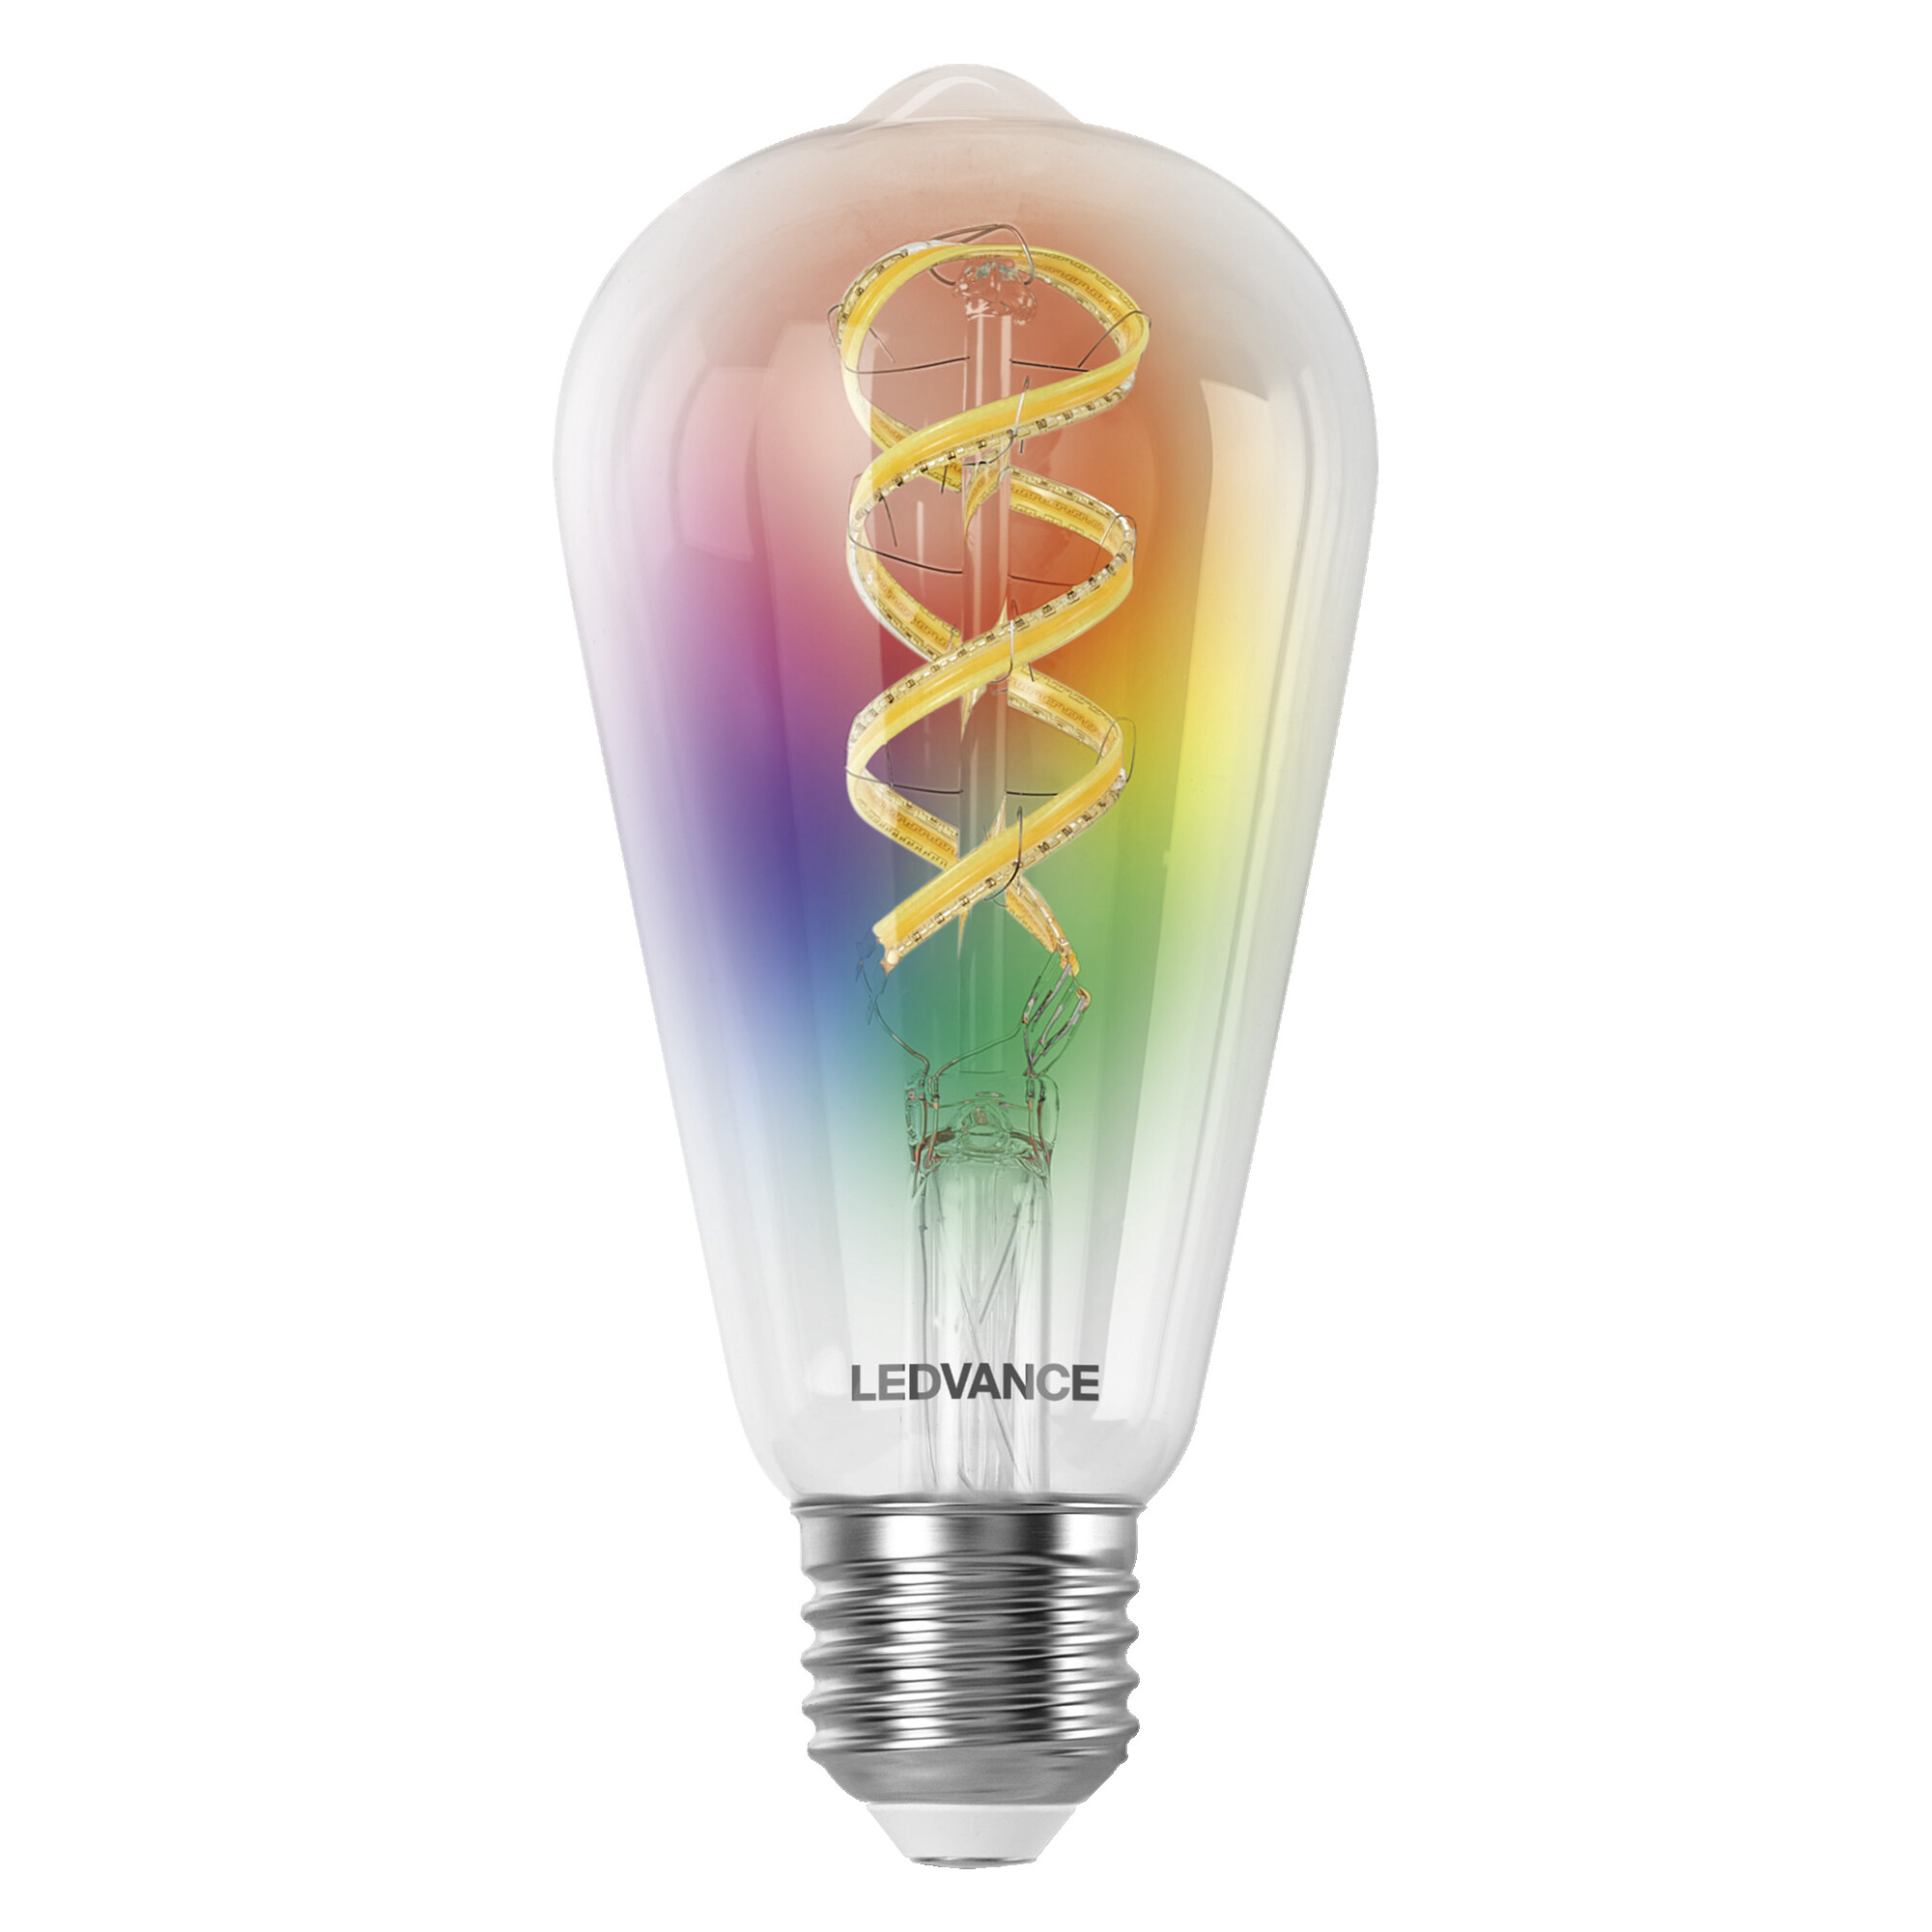 LED-Filament Lampe 'Smart+WiFi Edison' RGBTW 4,8 W E27 470 lm, dimmbar + product picture